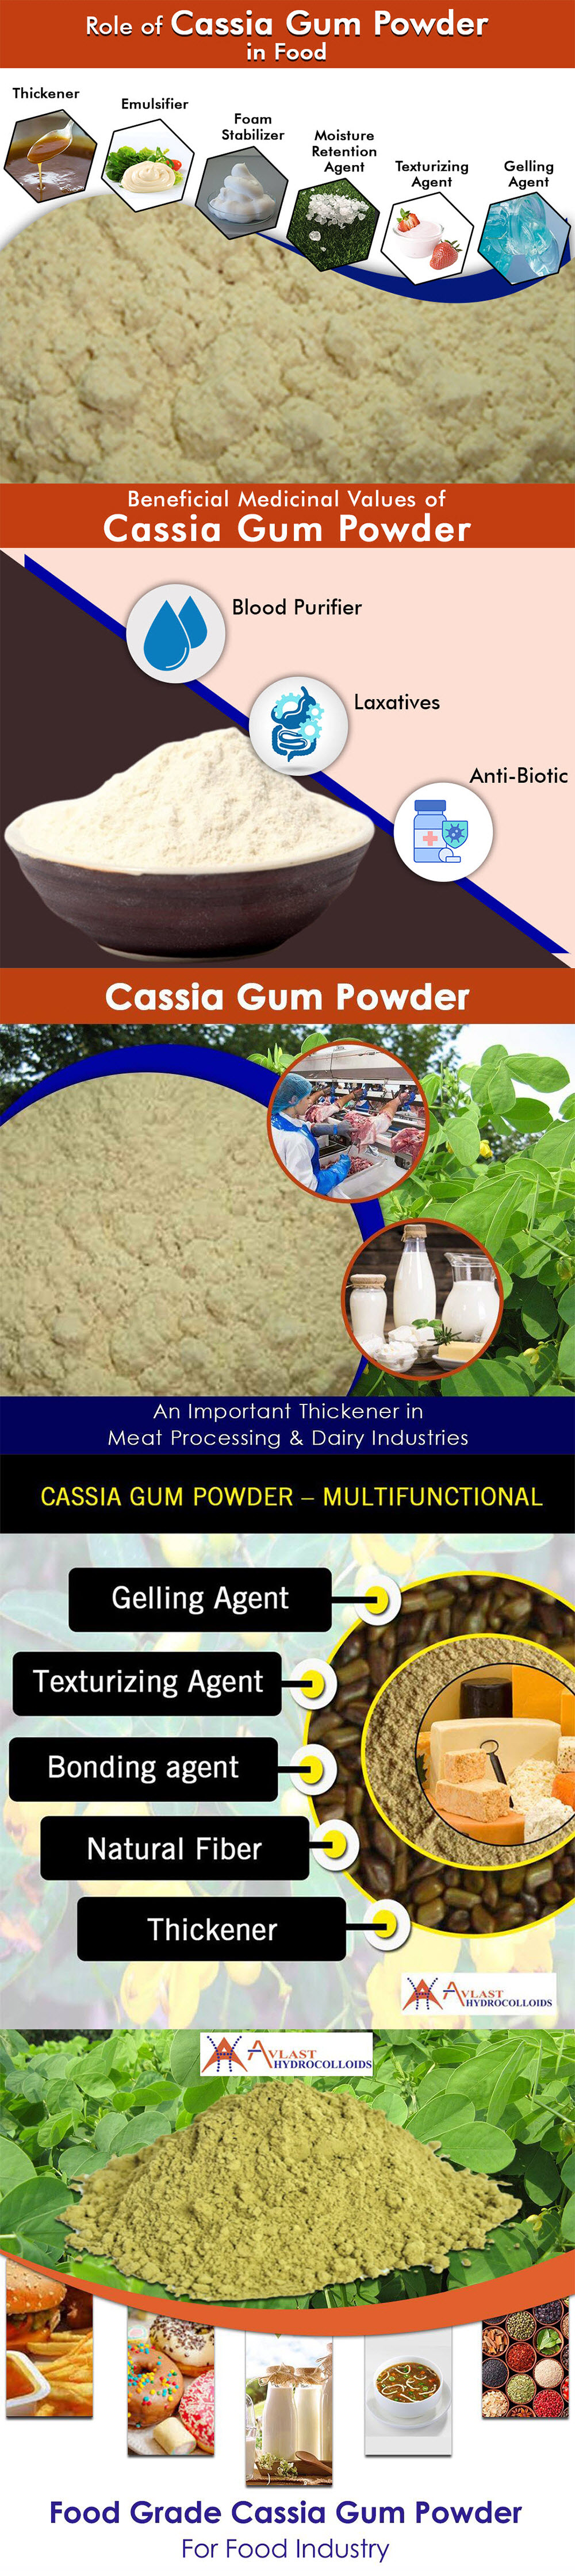 Purified Cassia Gum Powder for Human Food Application